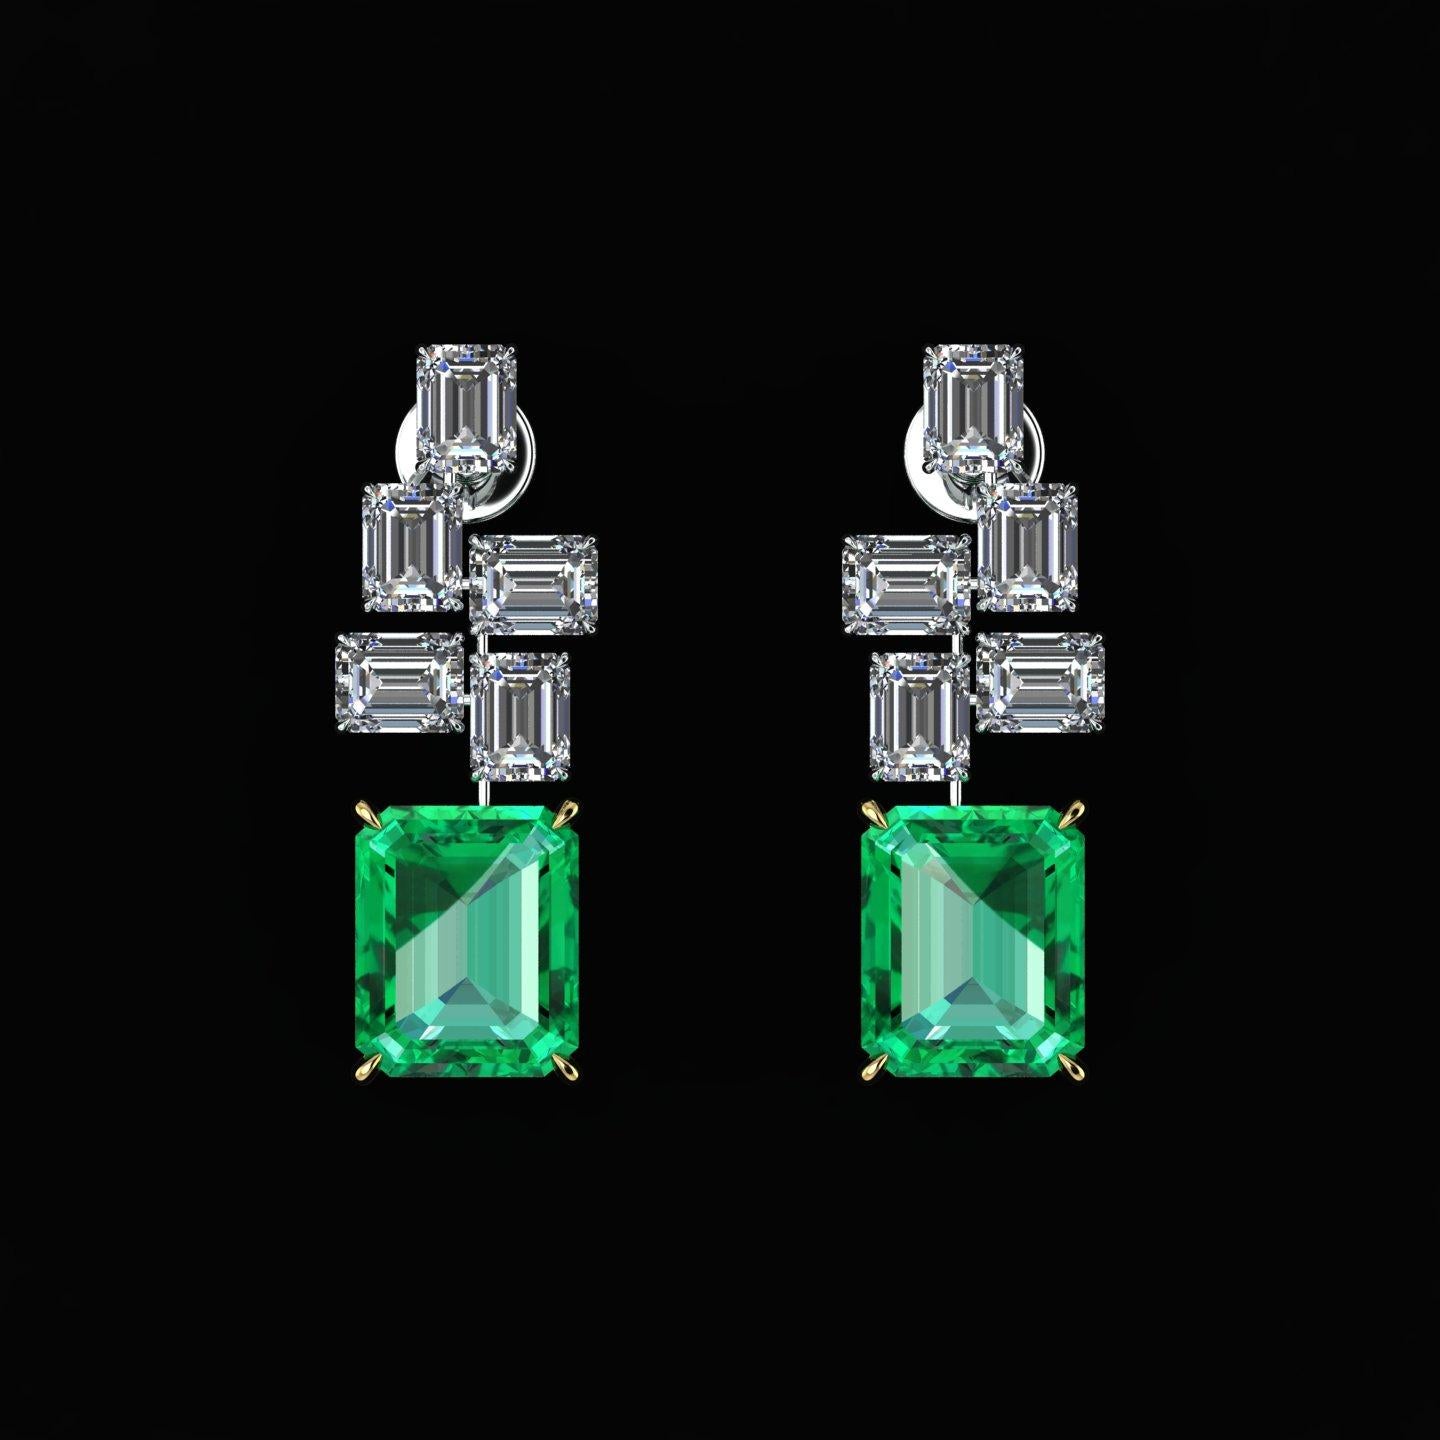 6.12 carats of Matching natural Emeralds from Colombia, GRS Certified (Gem Research Swisslaboratory) one of the most recognized gemmological laboratories for color gemstones in the worlds, with approximately 4 carats of White diamonds Emerald cut, G